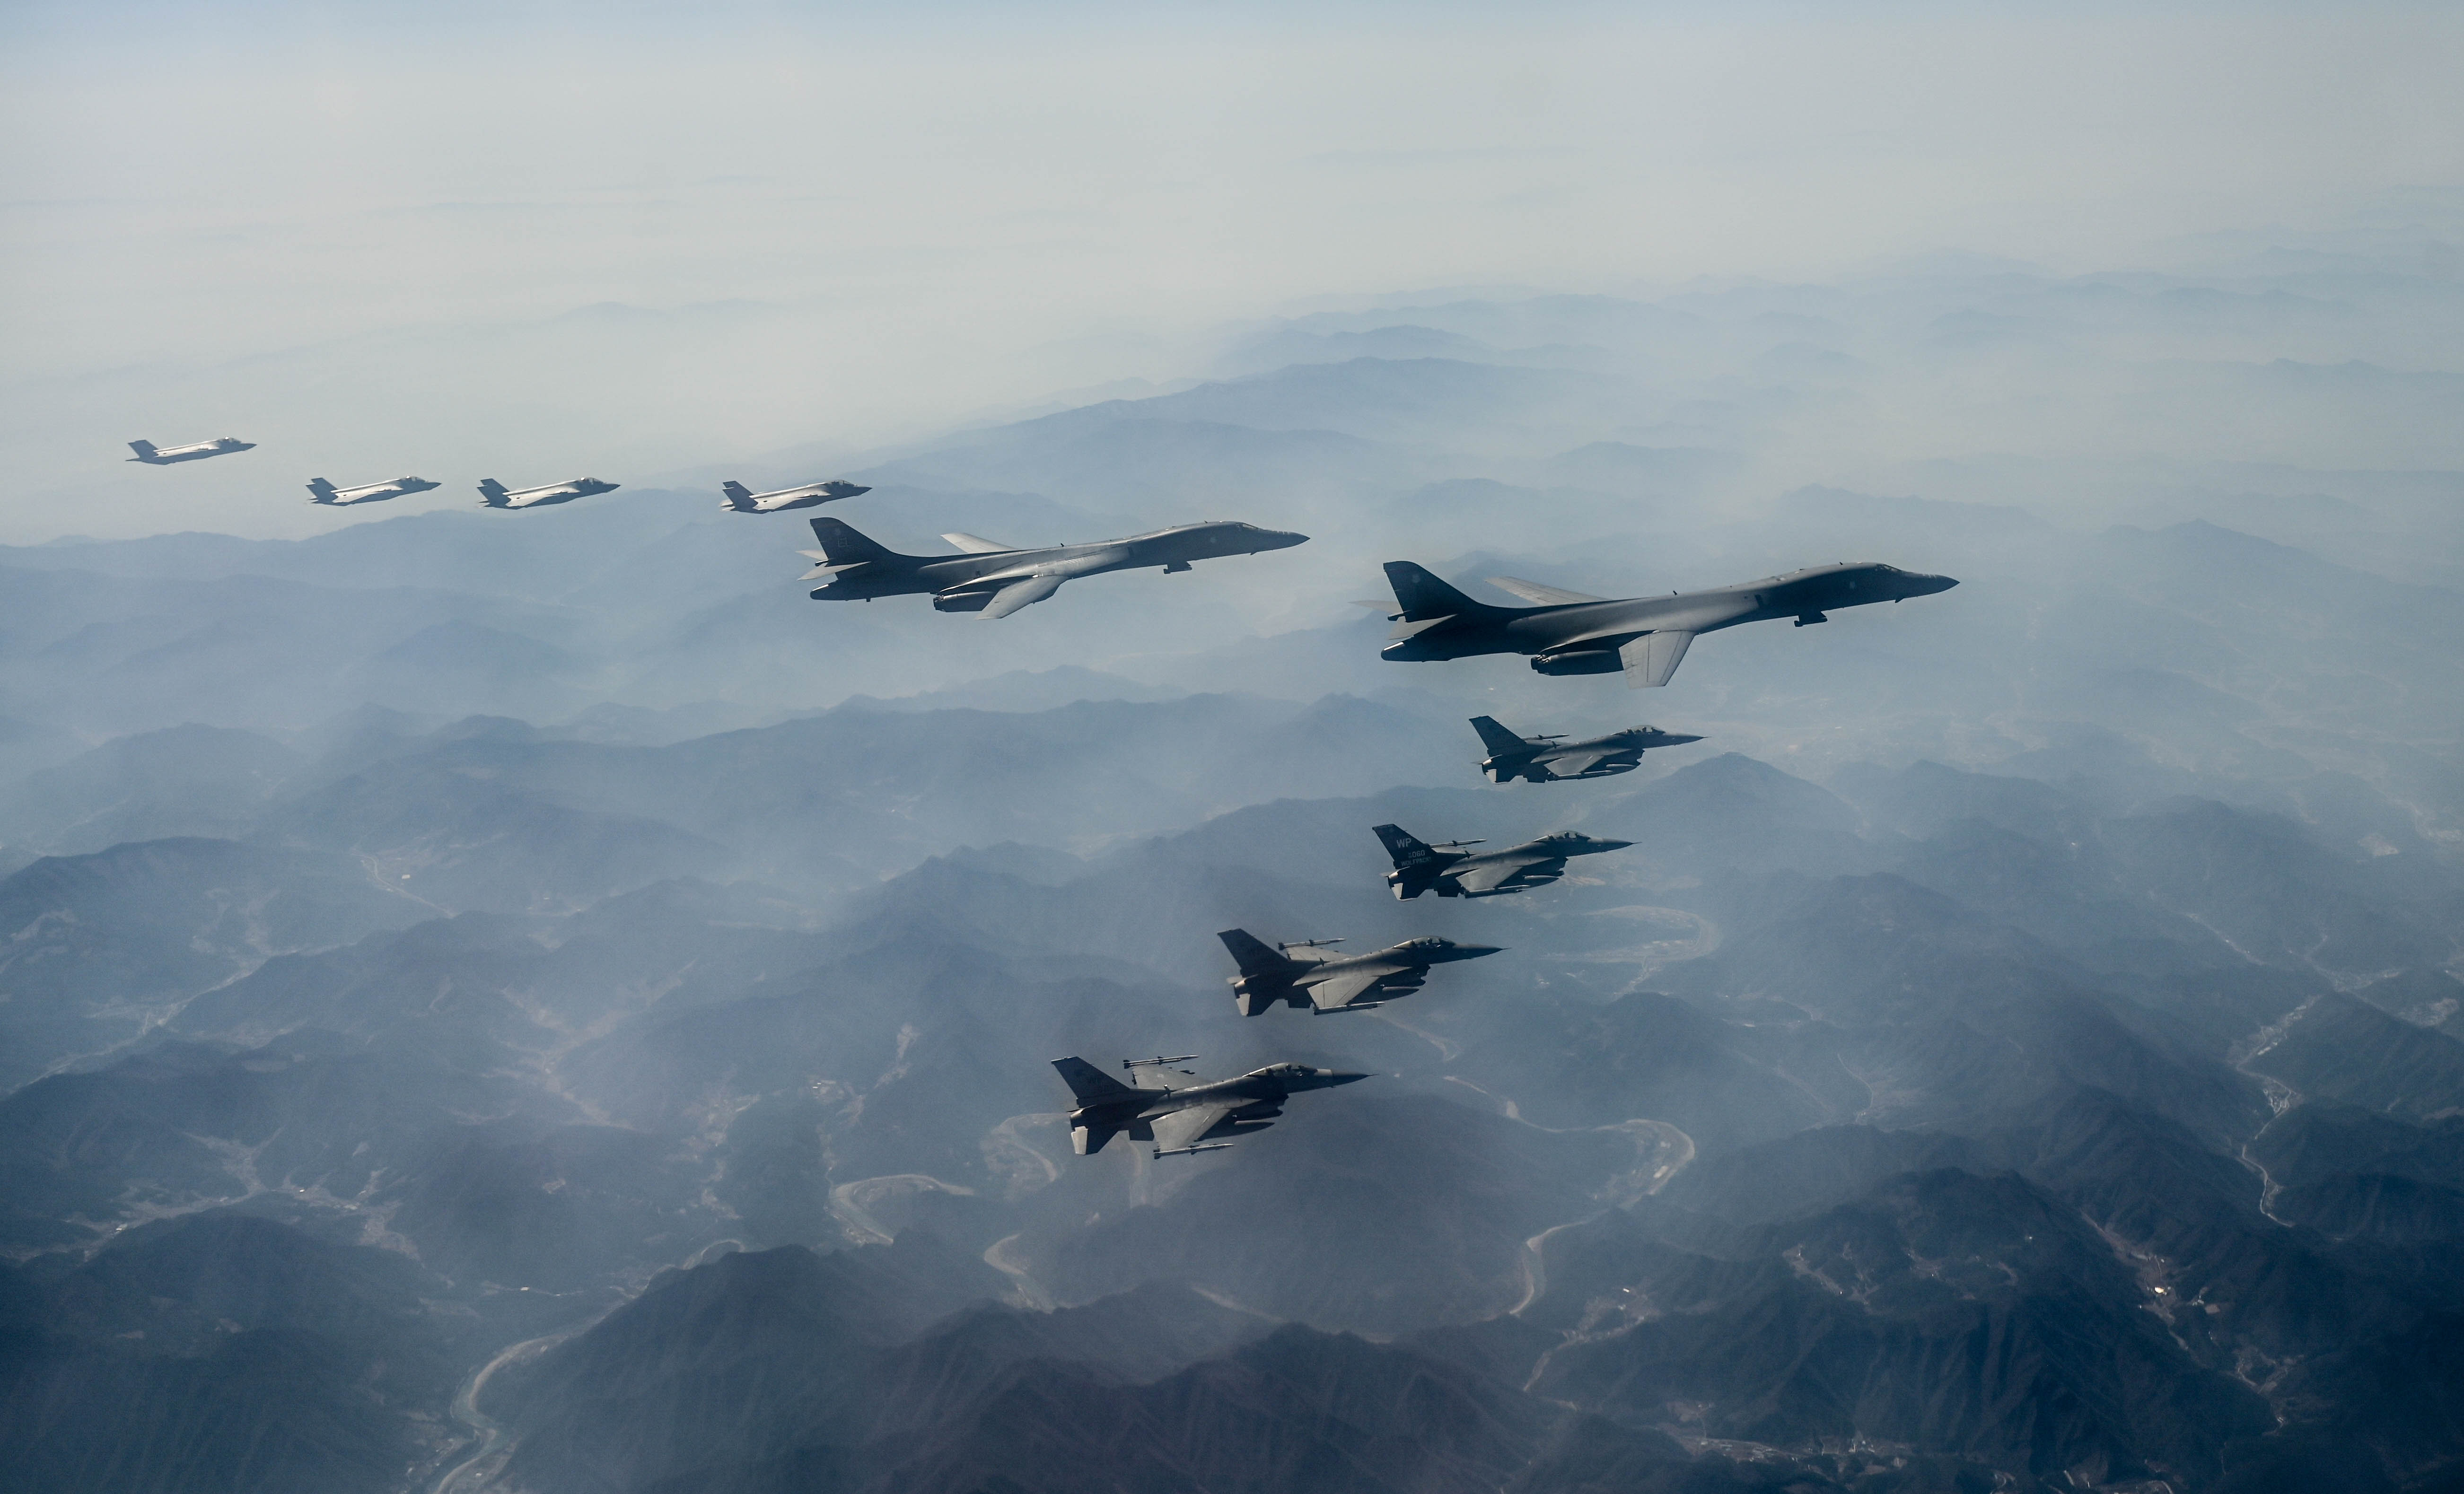 B-1B Lancer supersonic strategic bombers take part in exercise in South Korea for the 4th time since early 2023